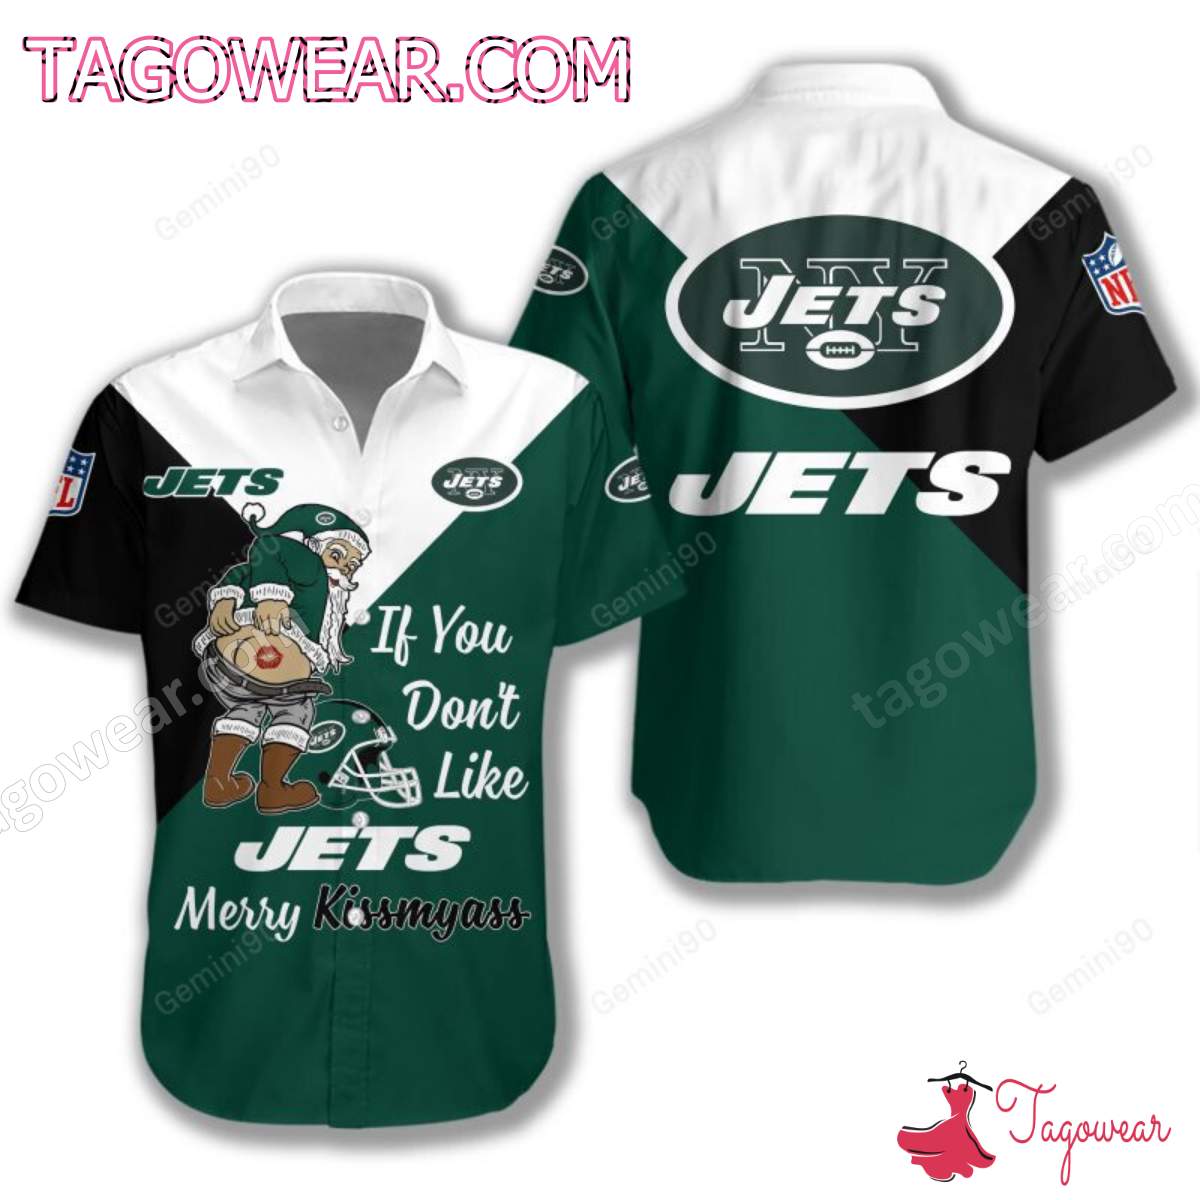 If You Don't Like New York Jets Merry Kissmyass T-shirt, Polo, Hoodie a